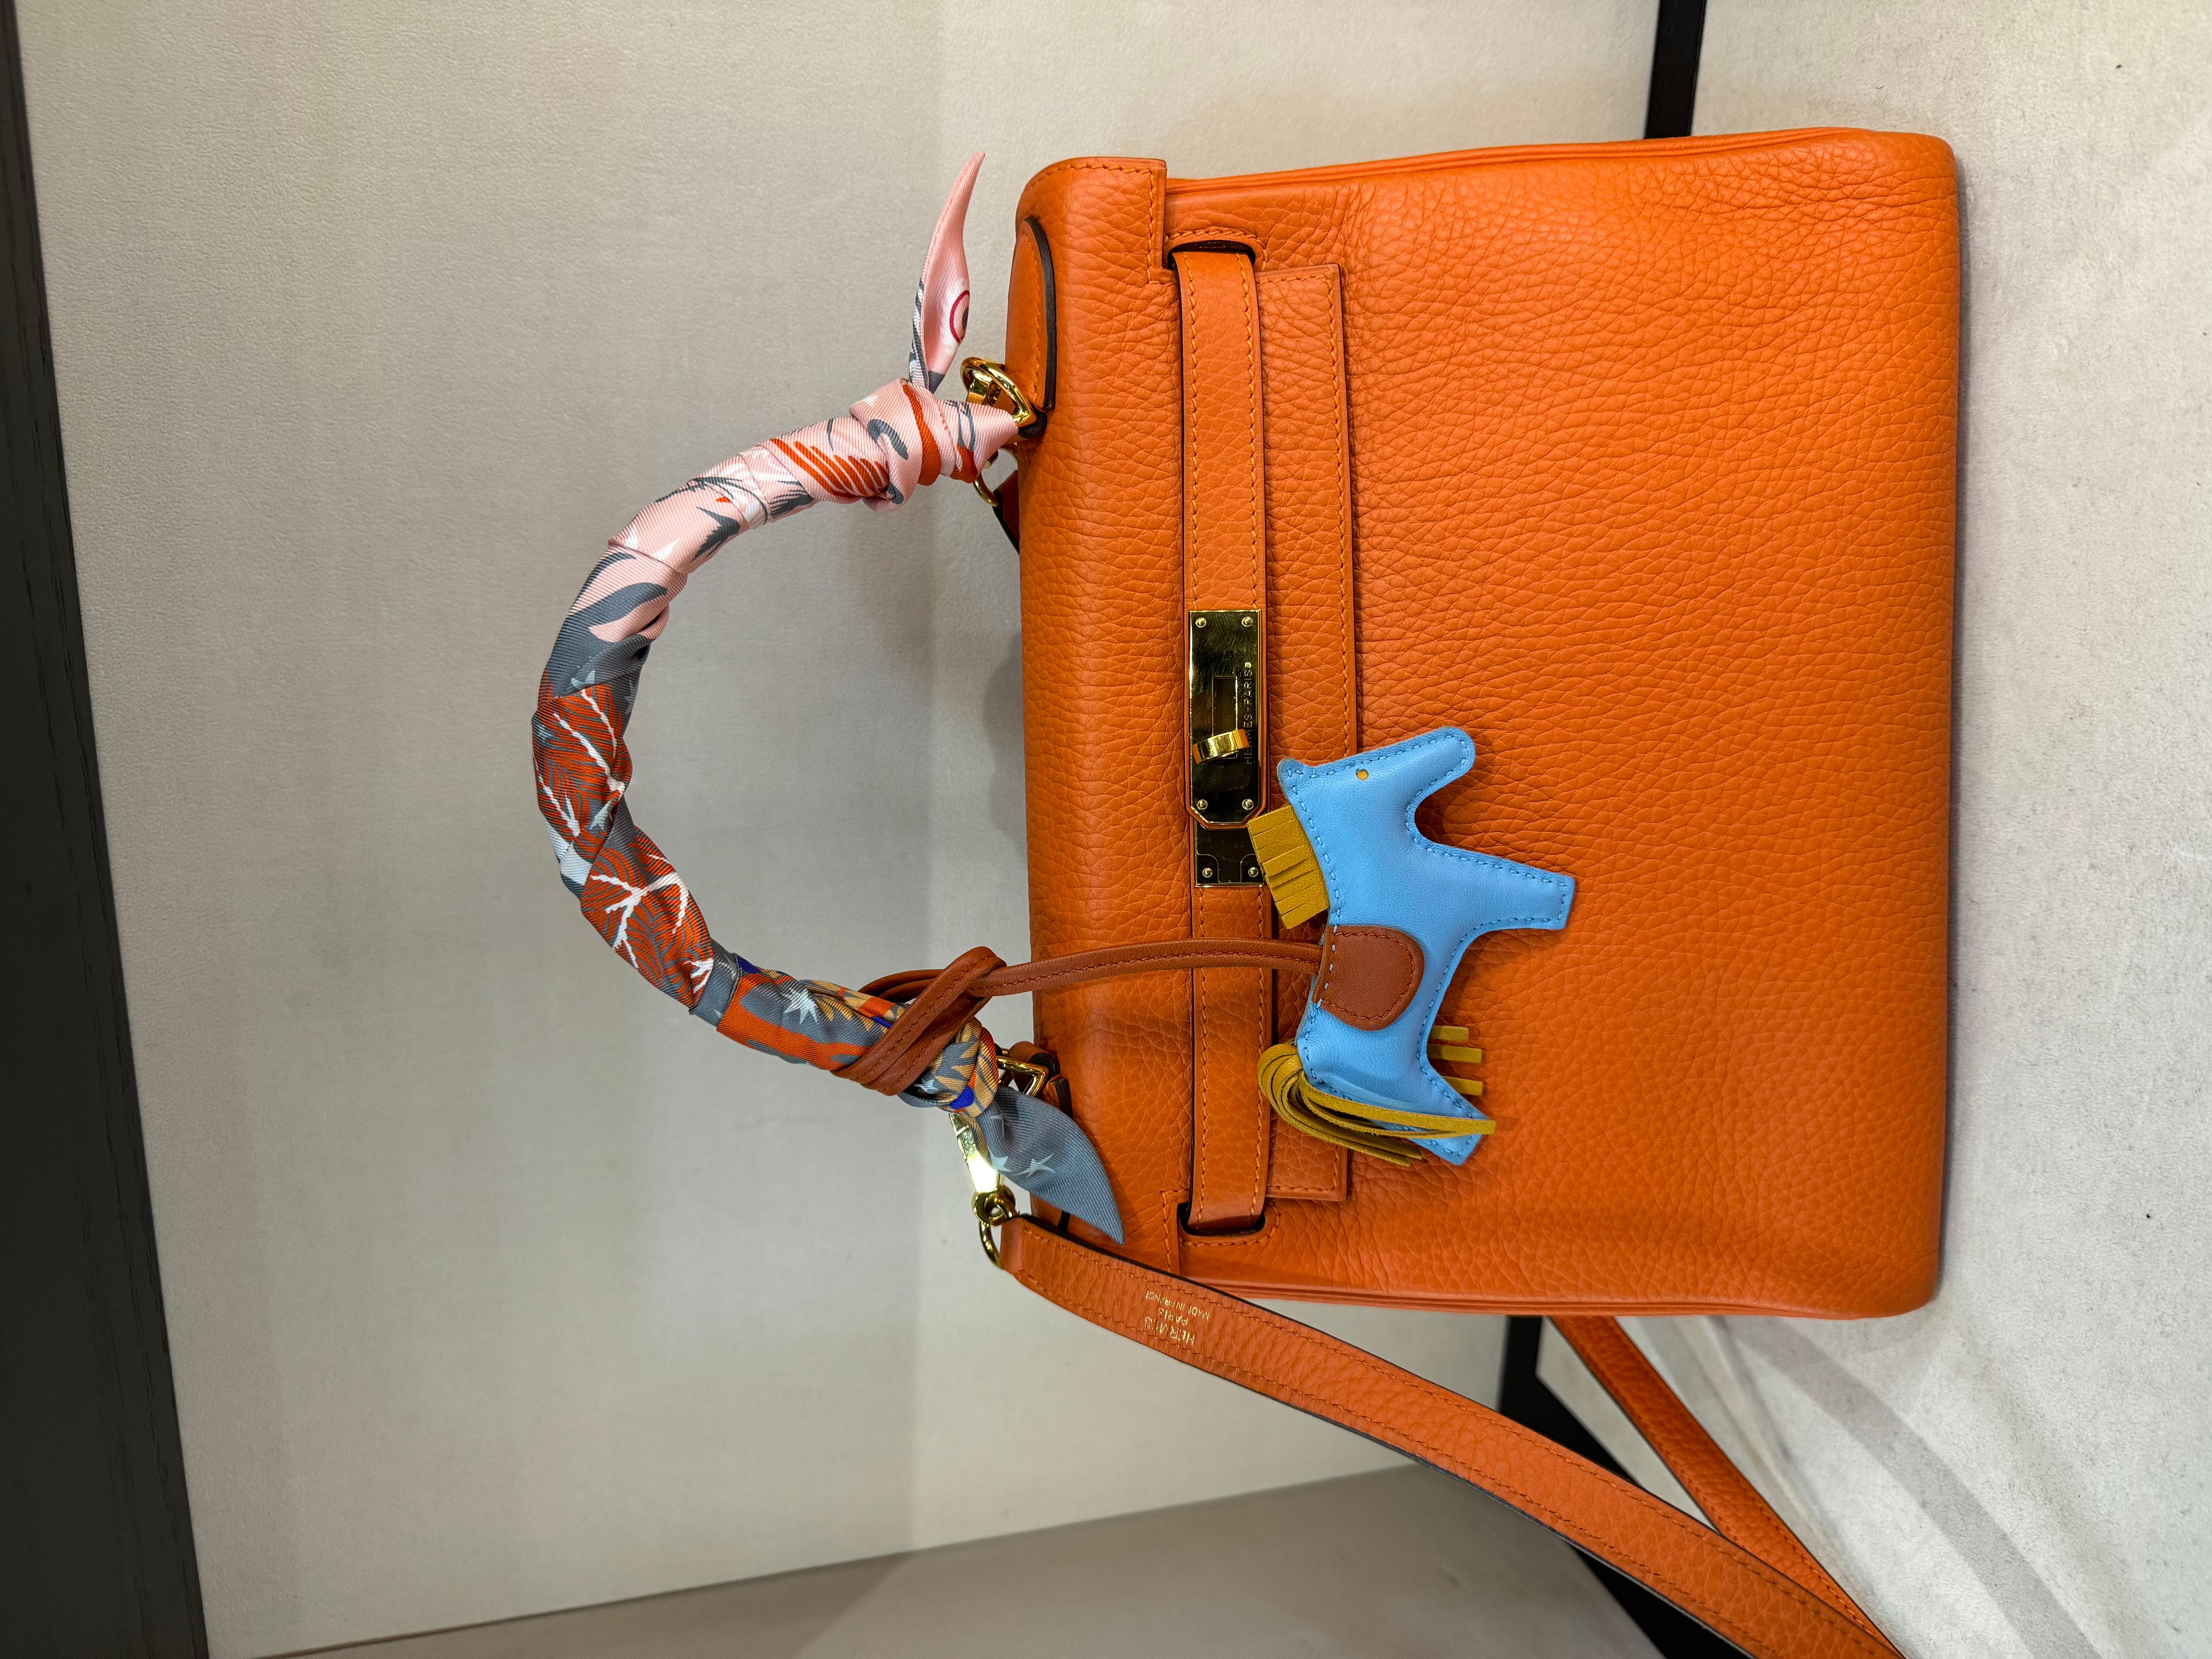 Hermes Kelly 28 Orange Taurillion Clemence Leather Gold Hardware Retourne Bag.
Such a desirable bag for a classic Hermes look, with the gold hardware even more rare. 

The Kelly is known for its simple design and unmatched elegance. The top handle